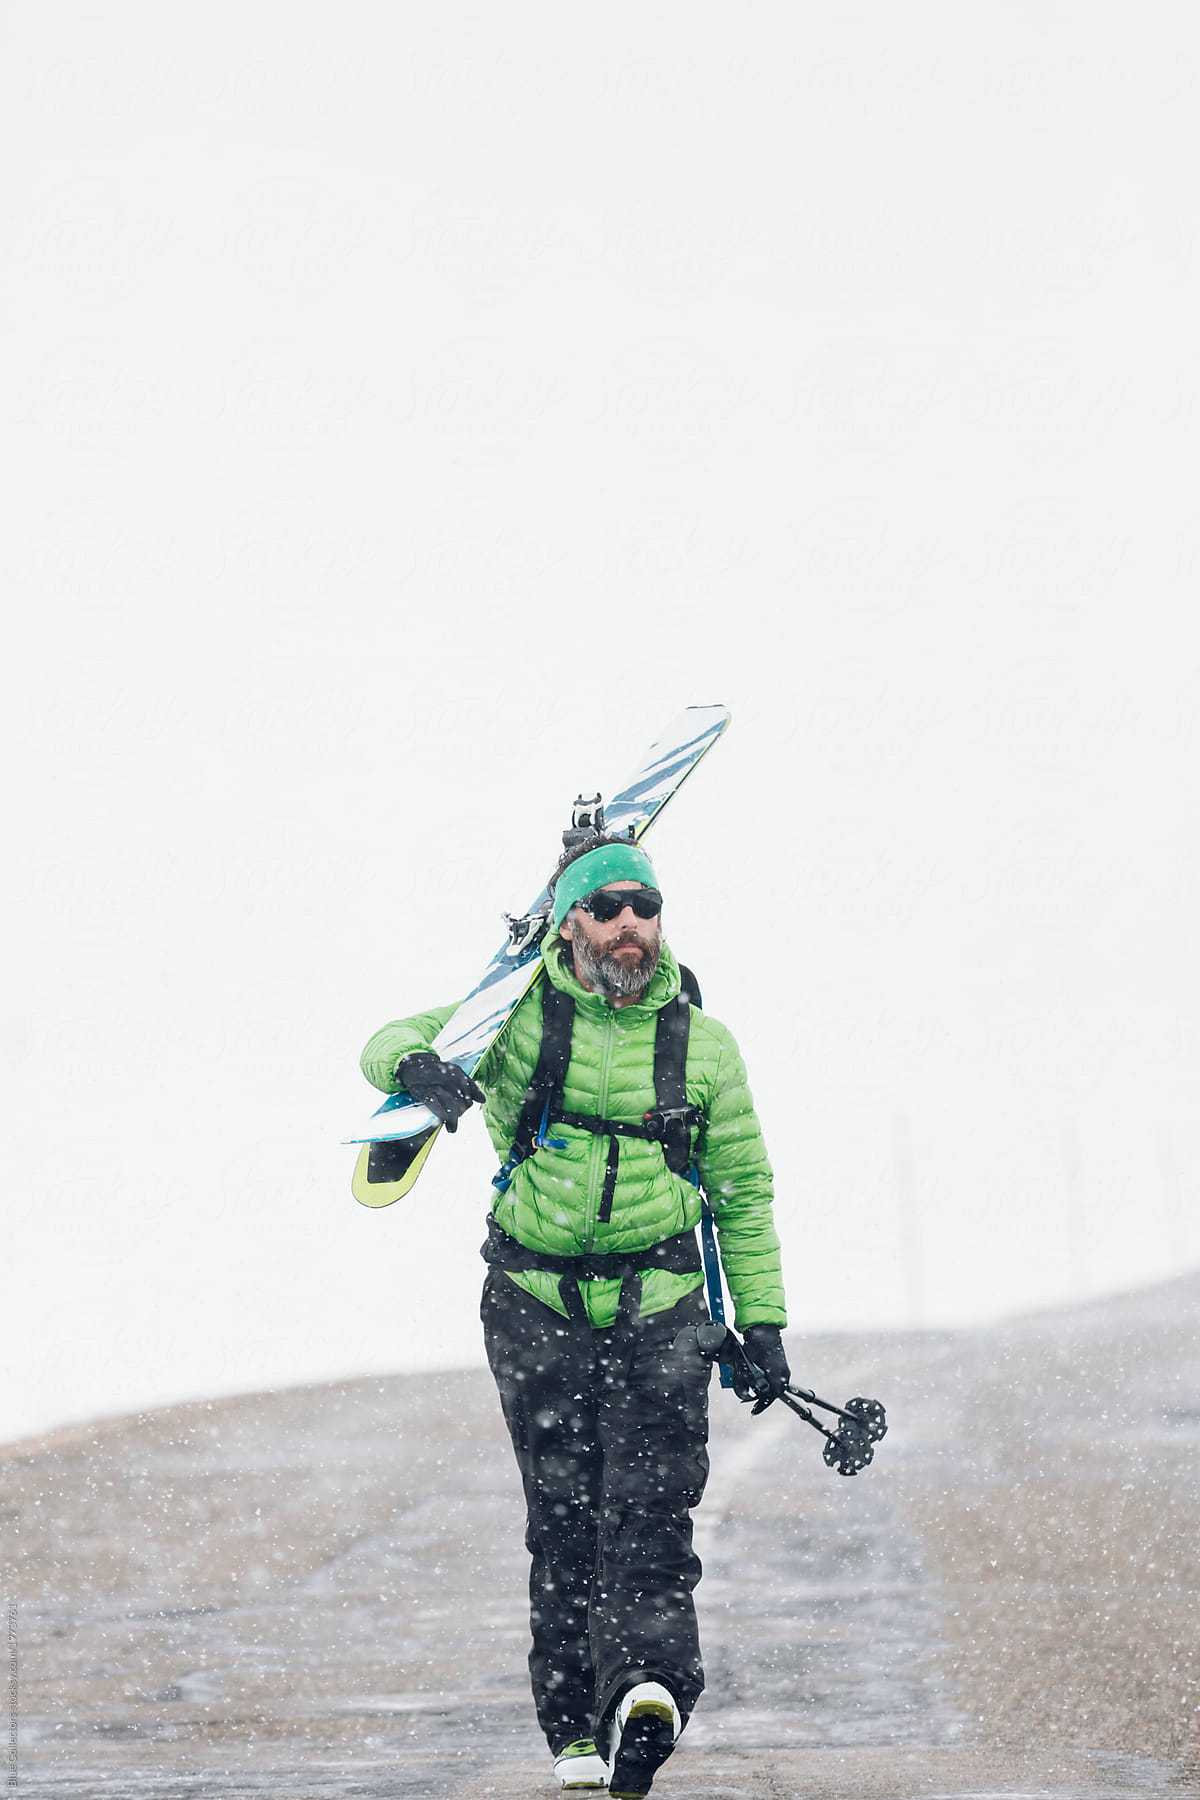 Skier walking along empty road in the snowy mountains in winter carrying skis